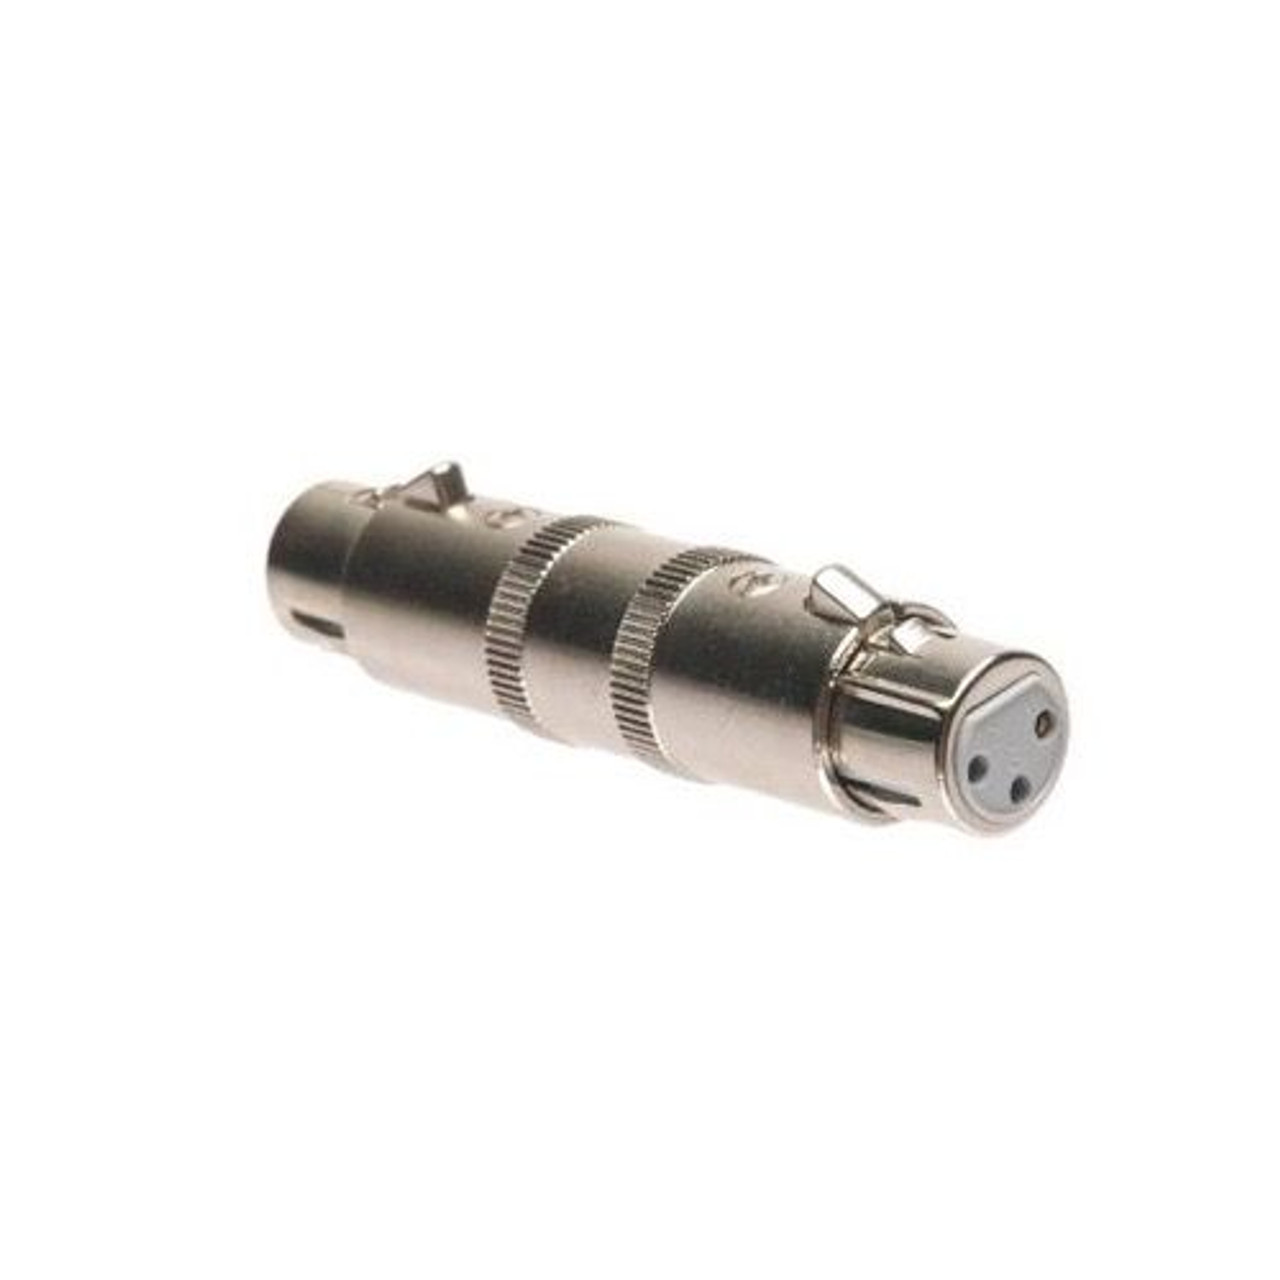 Eagle XLR Female to XLR Female Adapter 3C Jack Coupler Microphone Plug Gender Changer 3-Pin Audio XLR Jack to XLR Jack Micro-Phone XLR Jack Microphone Extension Connector